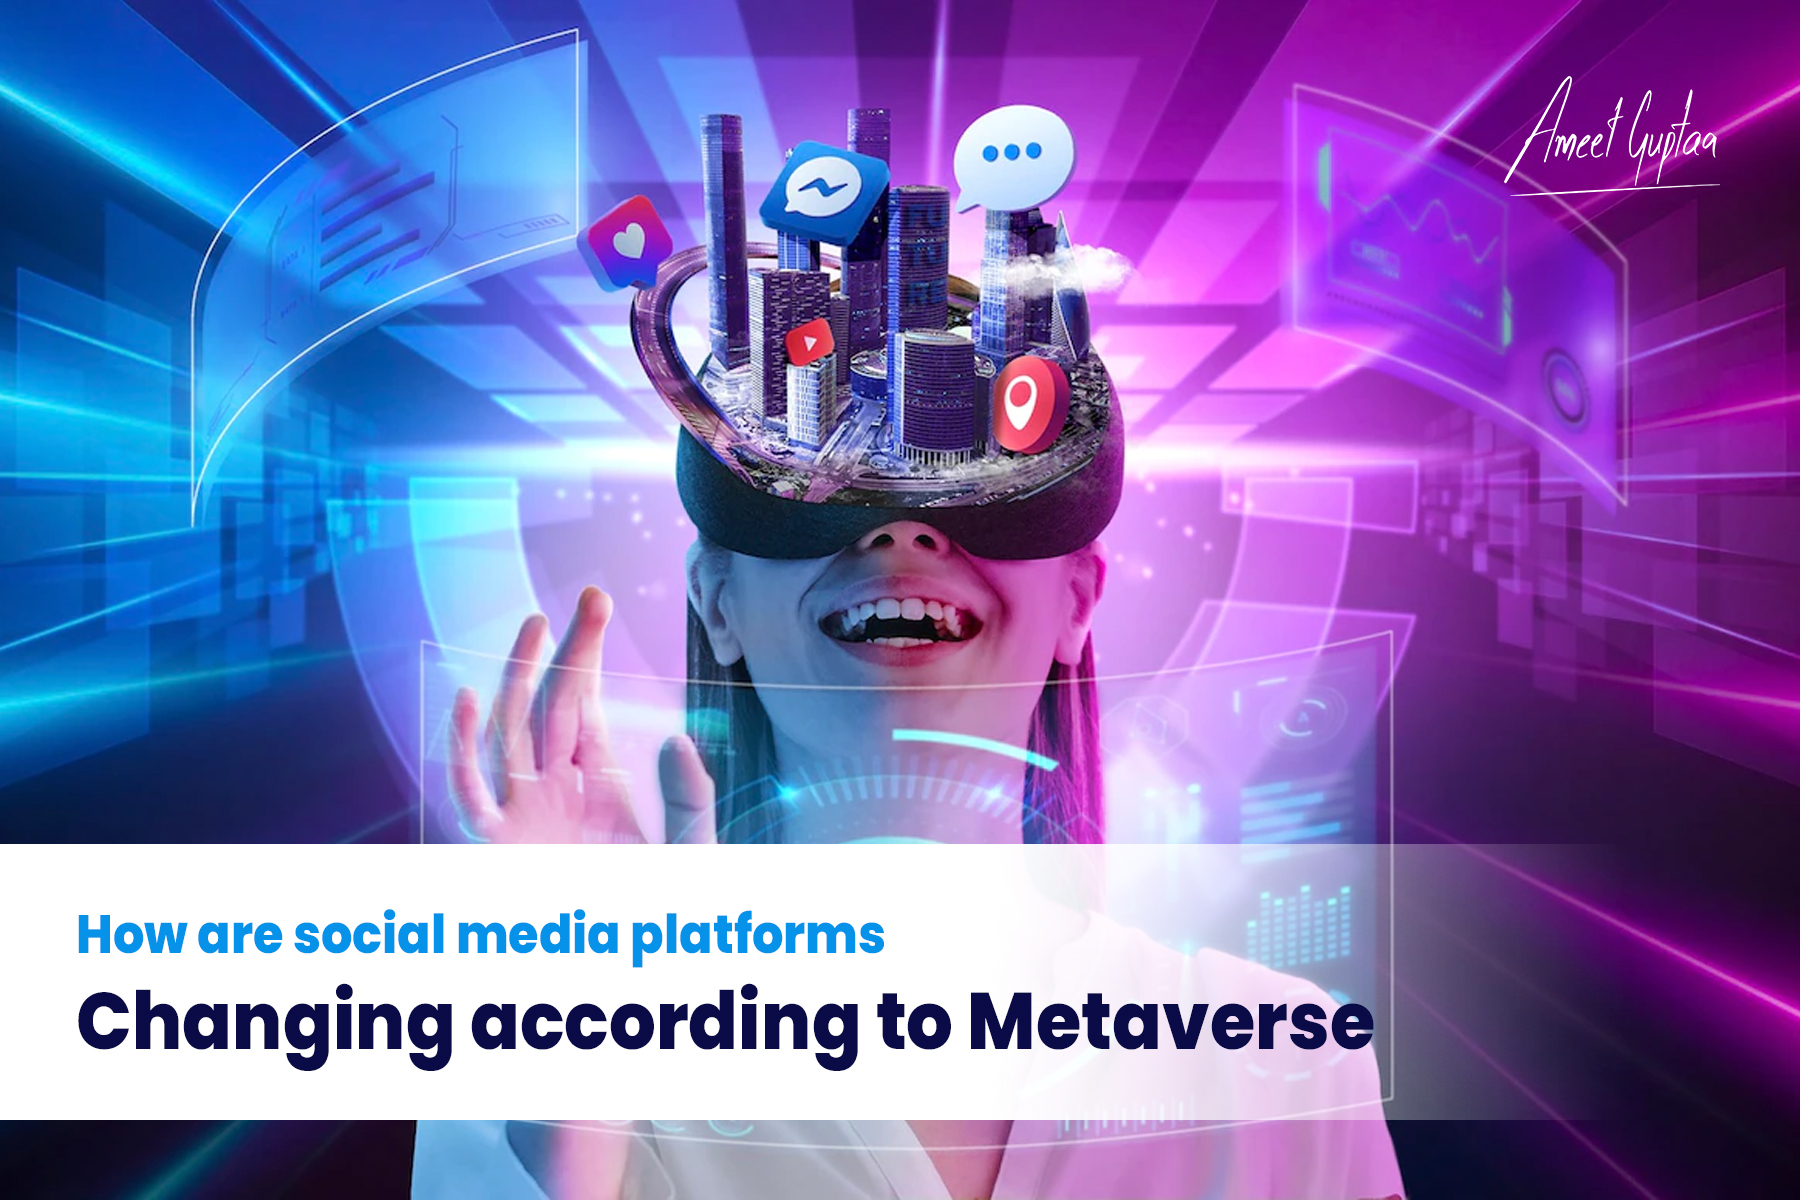 How are social media platforms changing according to Metaverse?